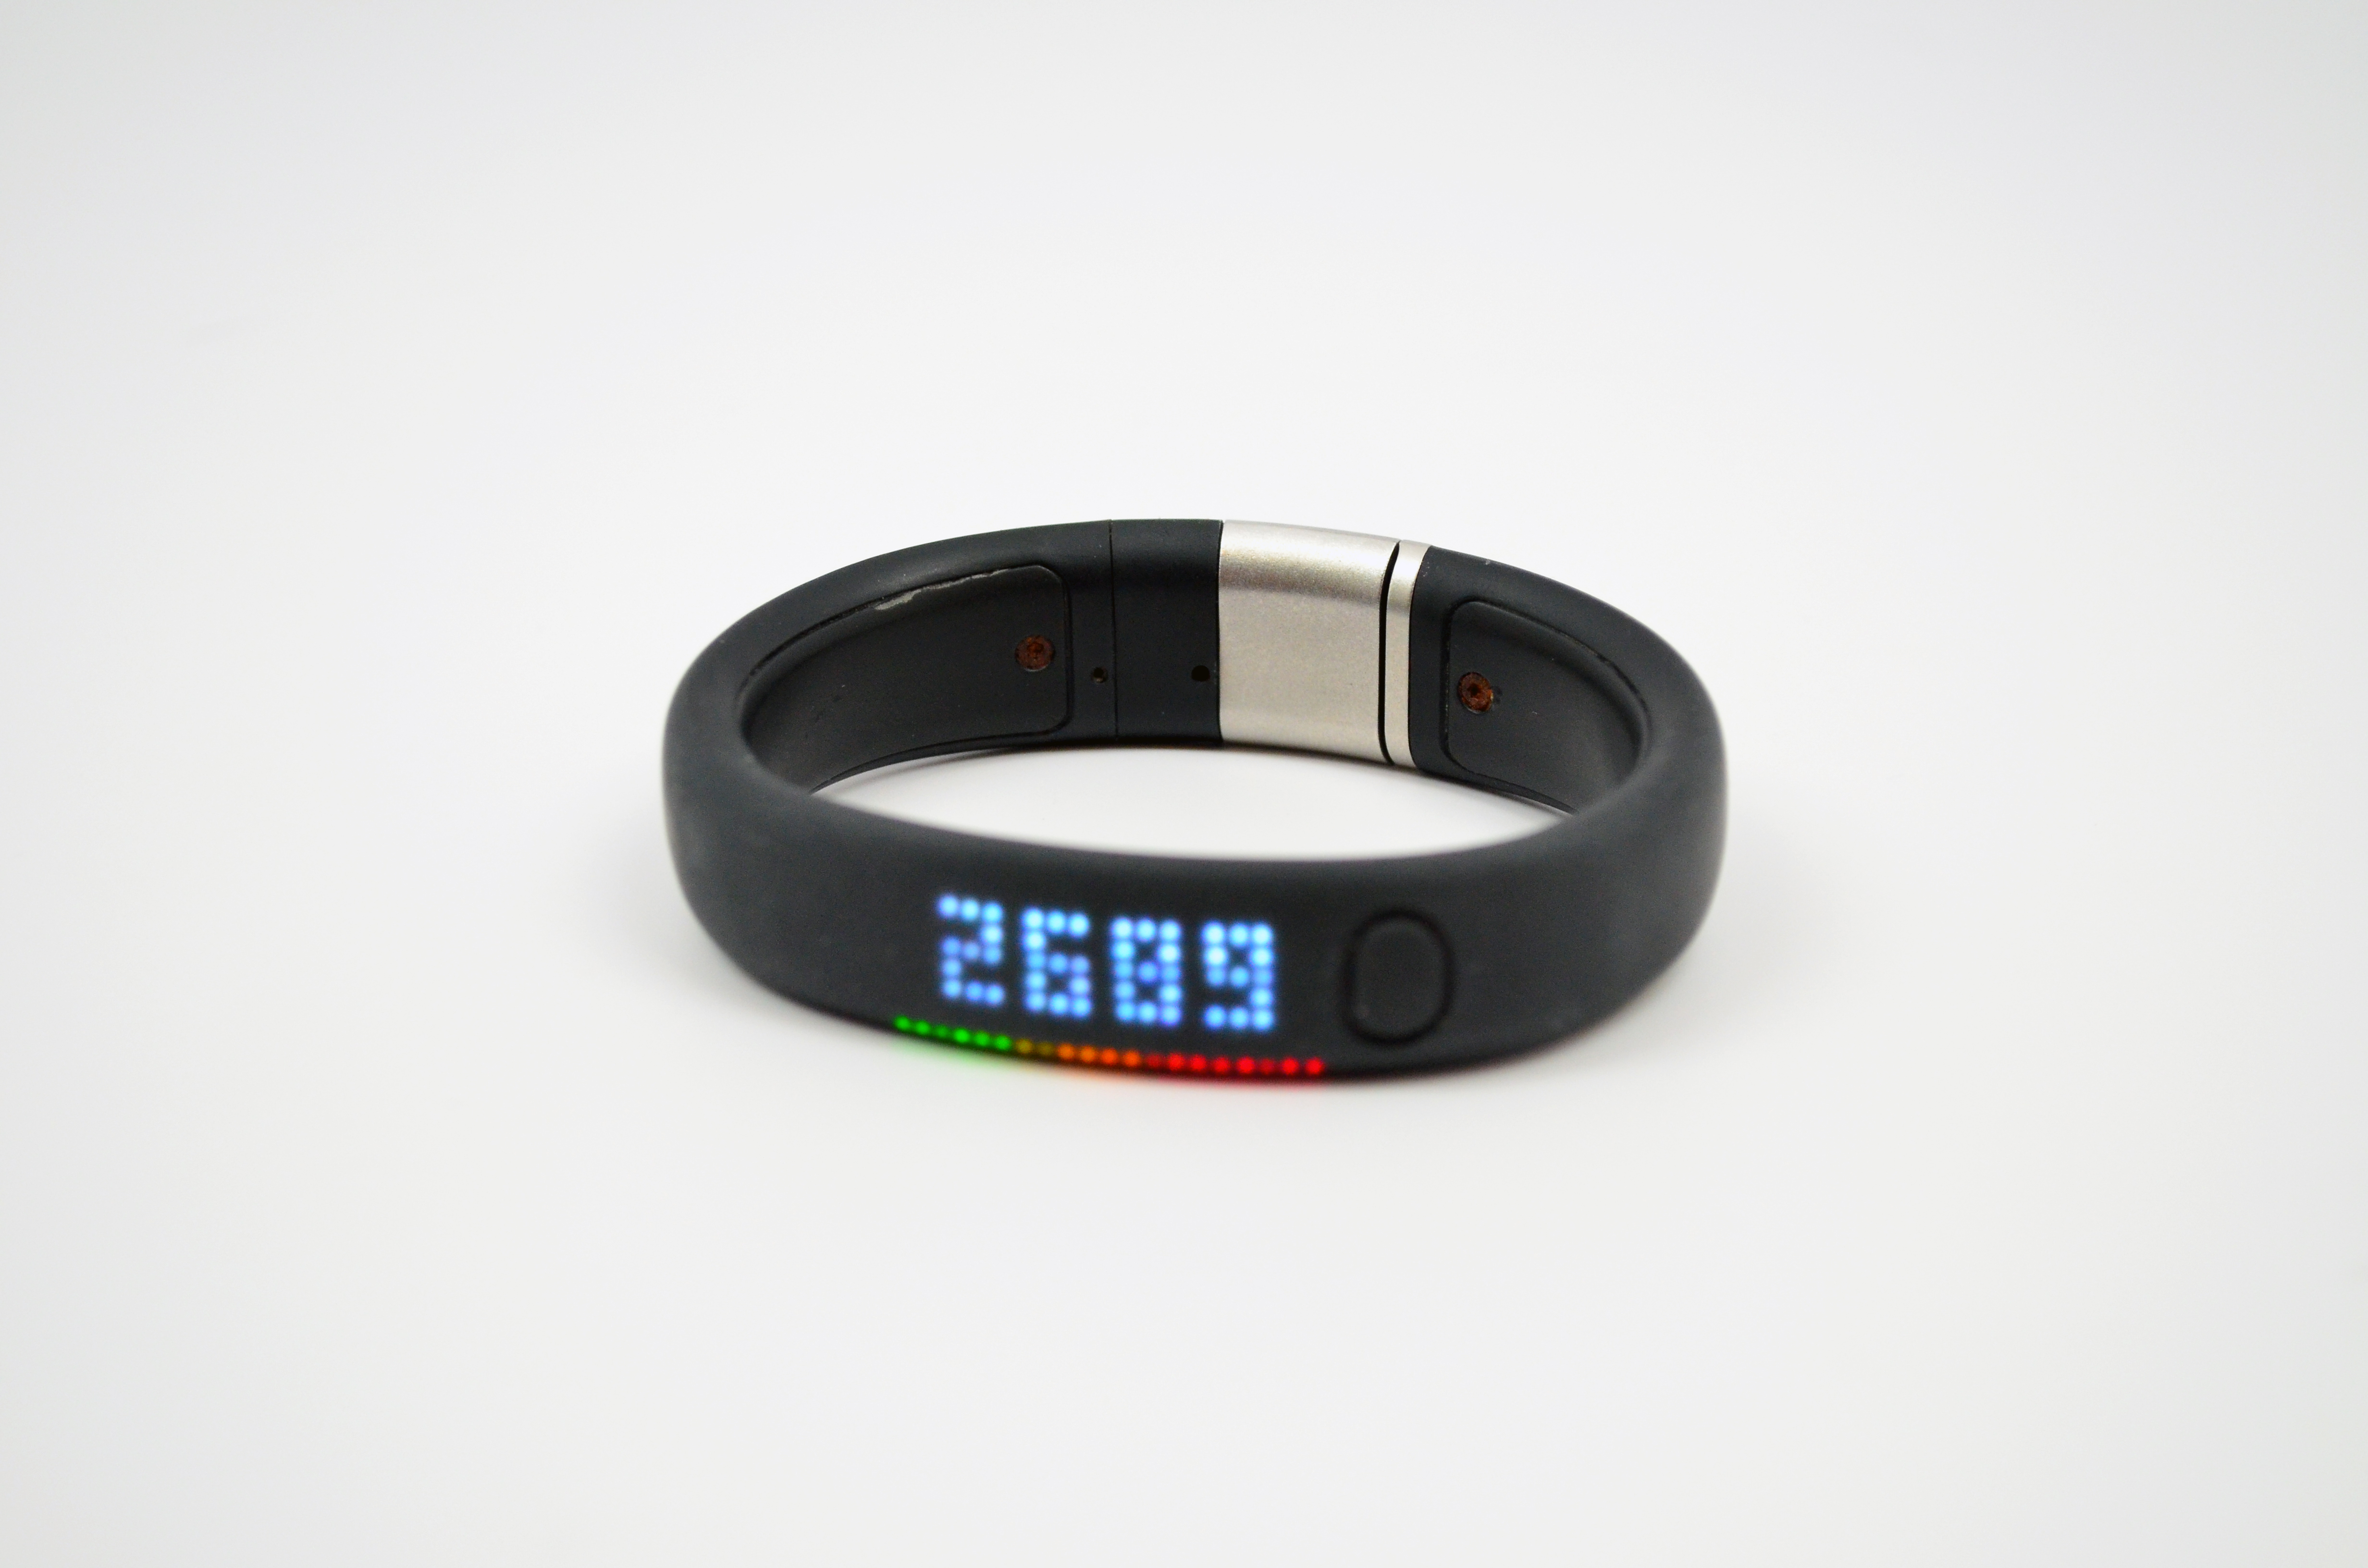 FuelBand 2: Heart Rate Monitor & Support